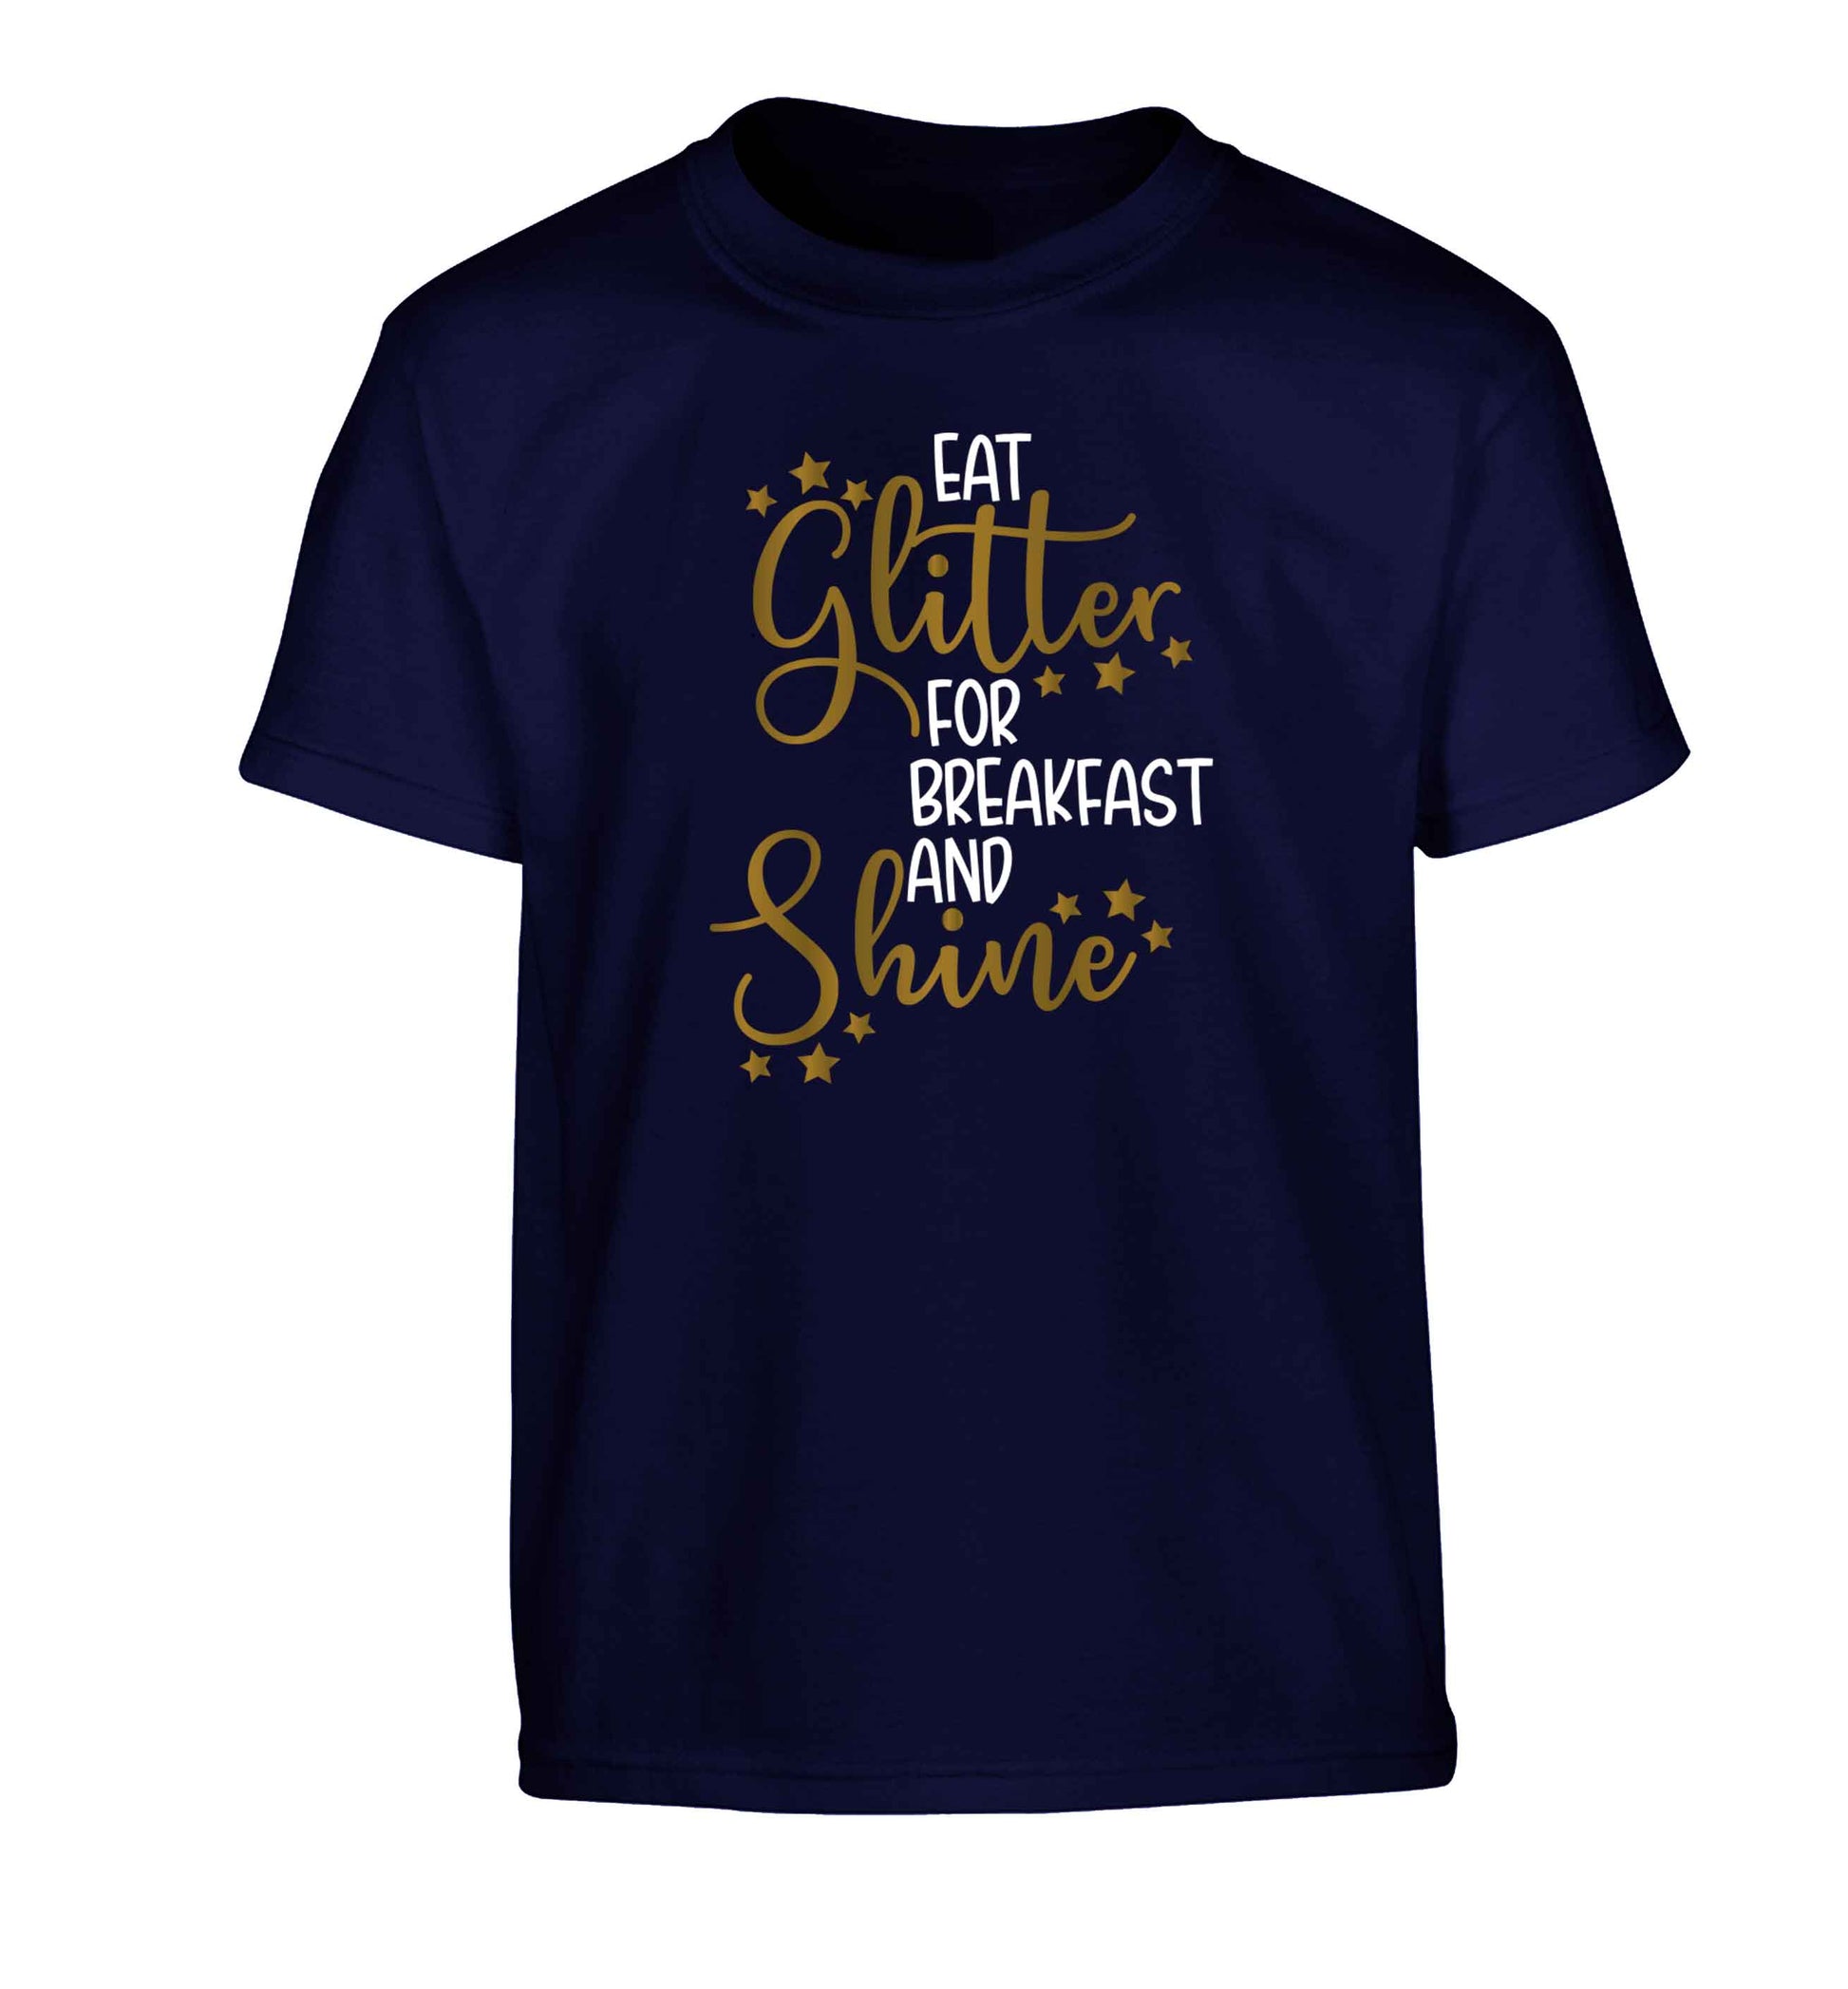 Eat glitter for breakfast and shine all day Children's navy Tshirt 12-13 Years